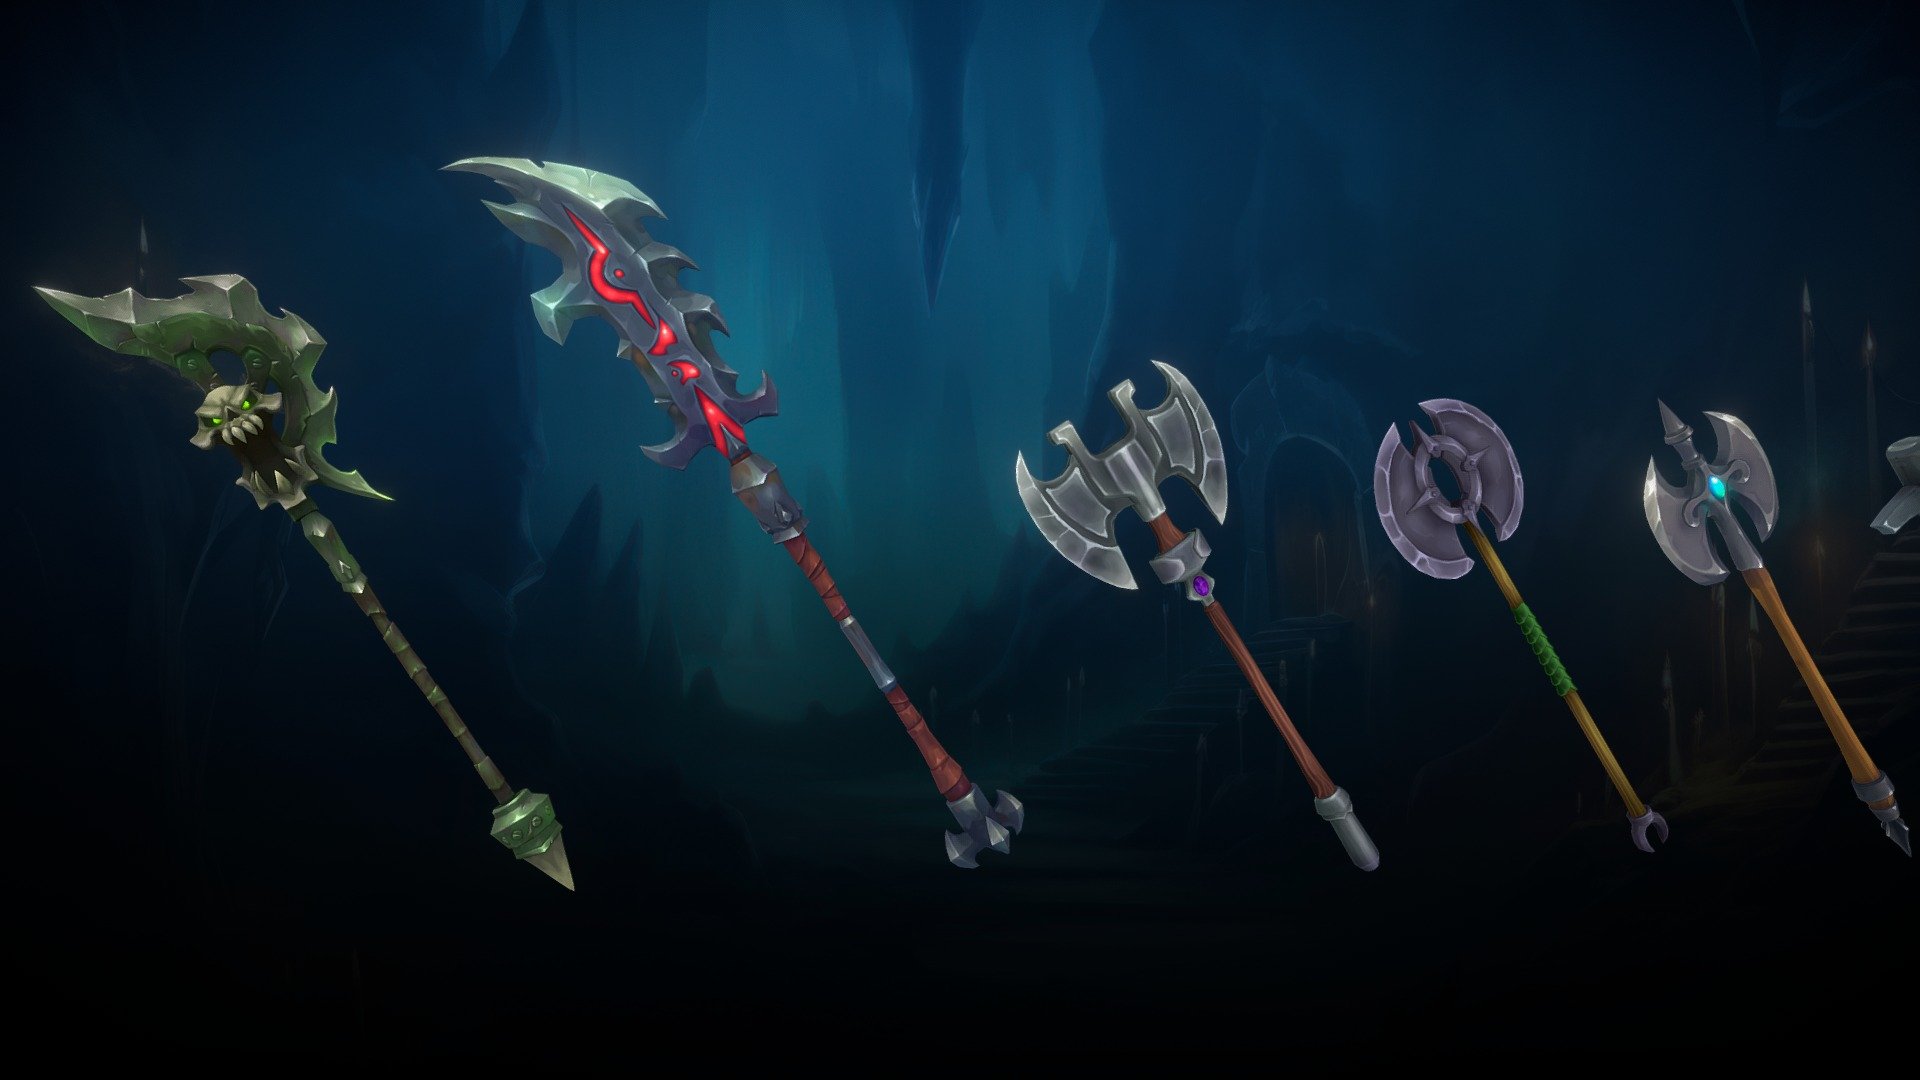 Stylized weapons for a project.

Software used: Zbrush, Autodesk Maya, Autodesk 3ds Max, Substance Painter - Stylized Fantasy Axes - 3D model by N-hance Studio (@Malice6731) 3d model